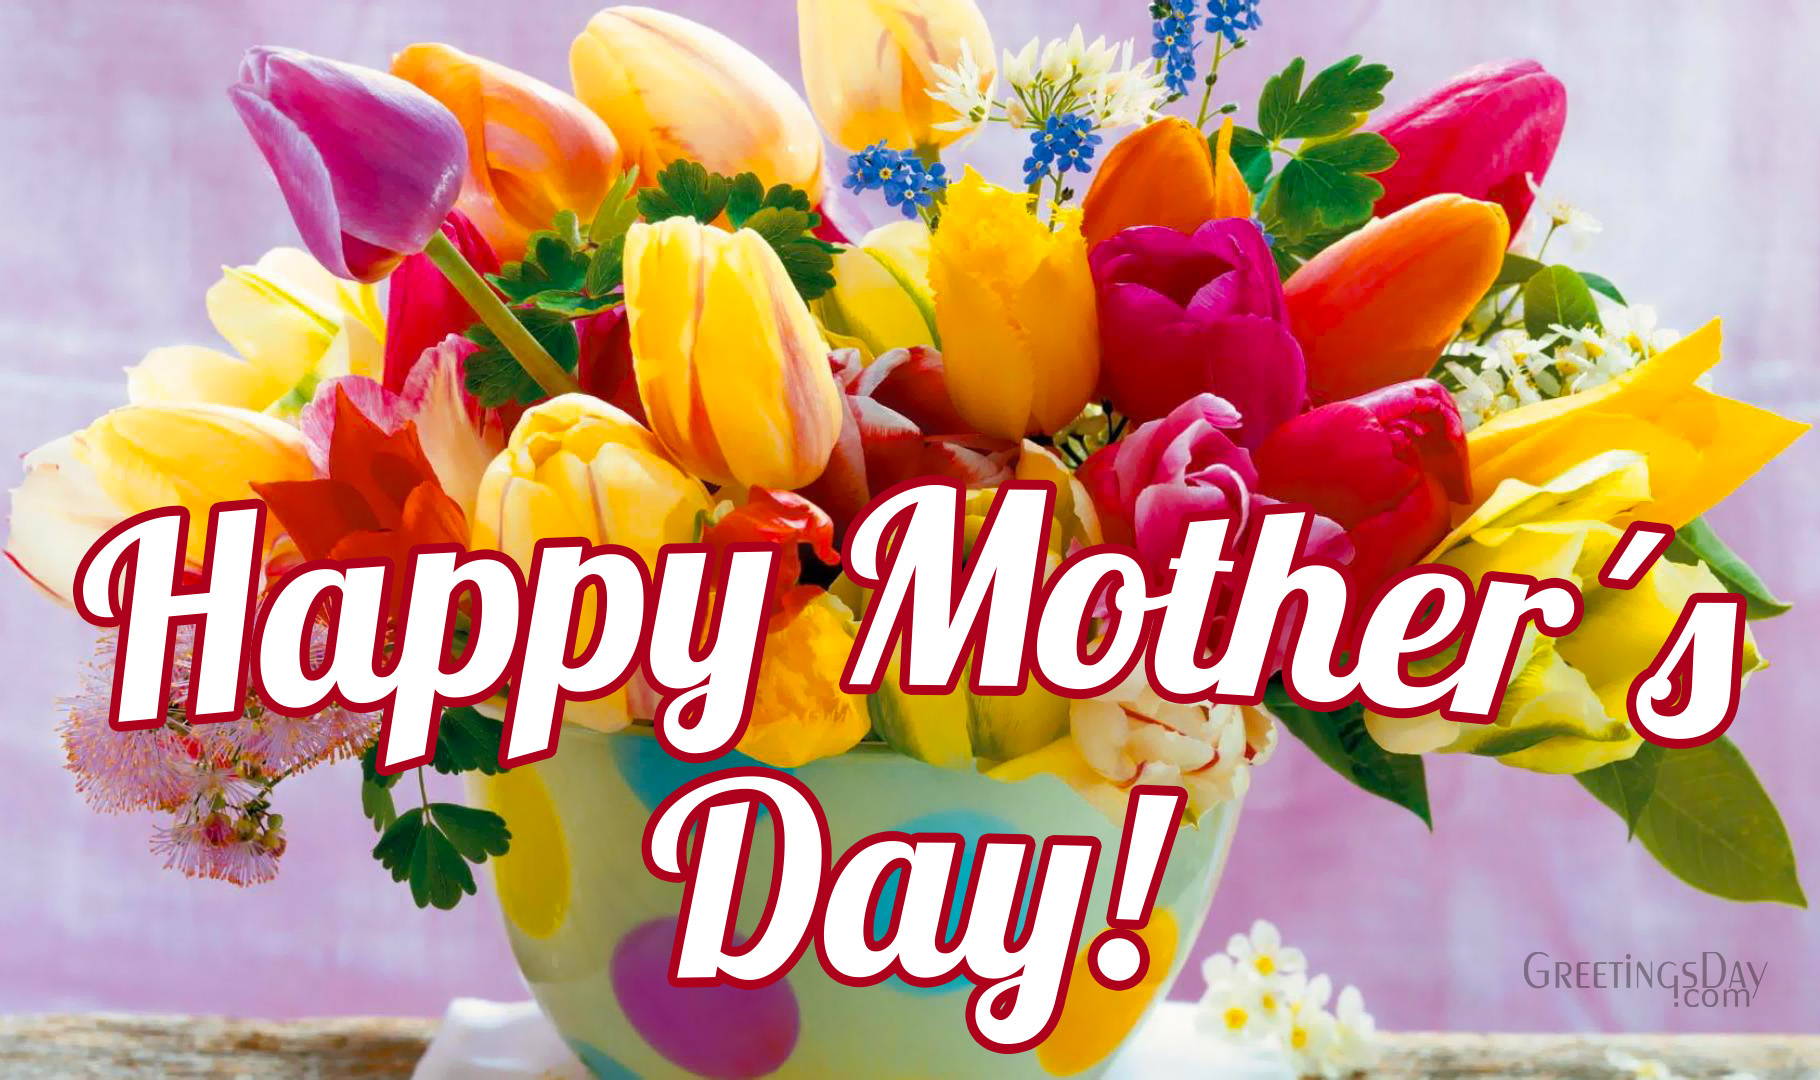 Happy mother's day memes and funny quotes to share with the best mom